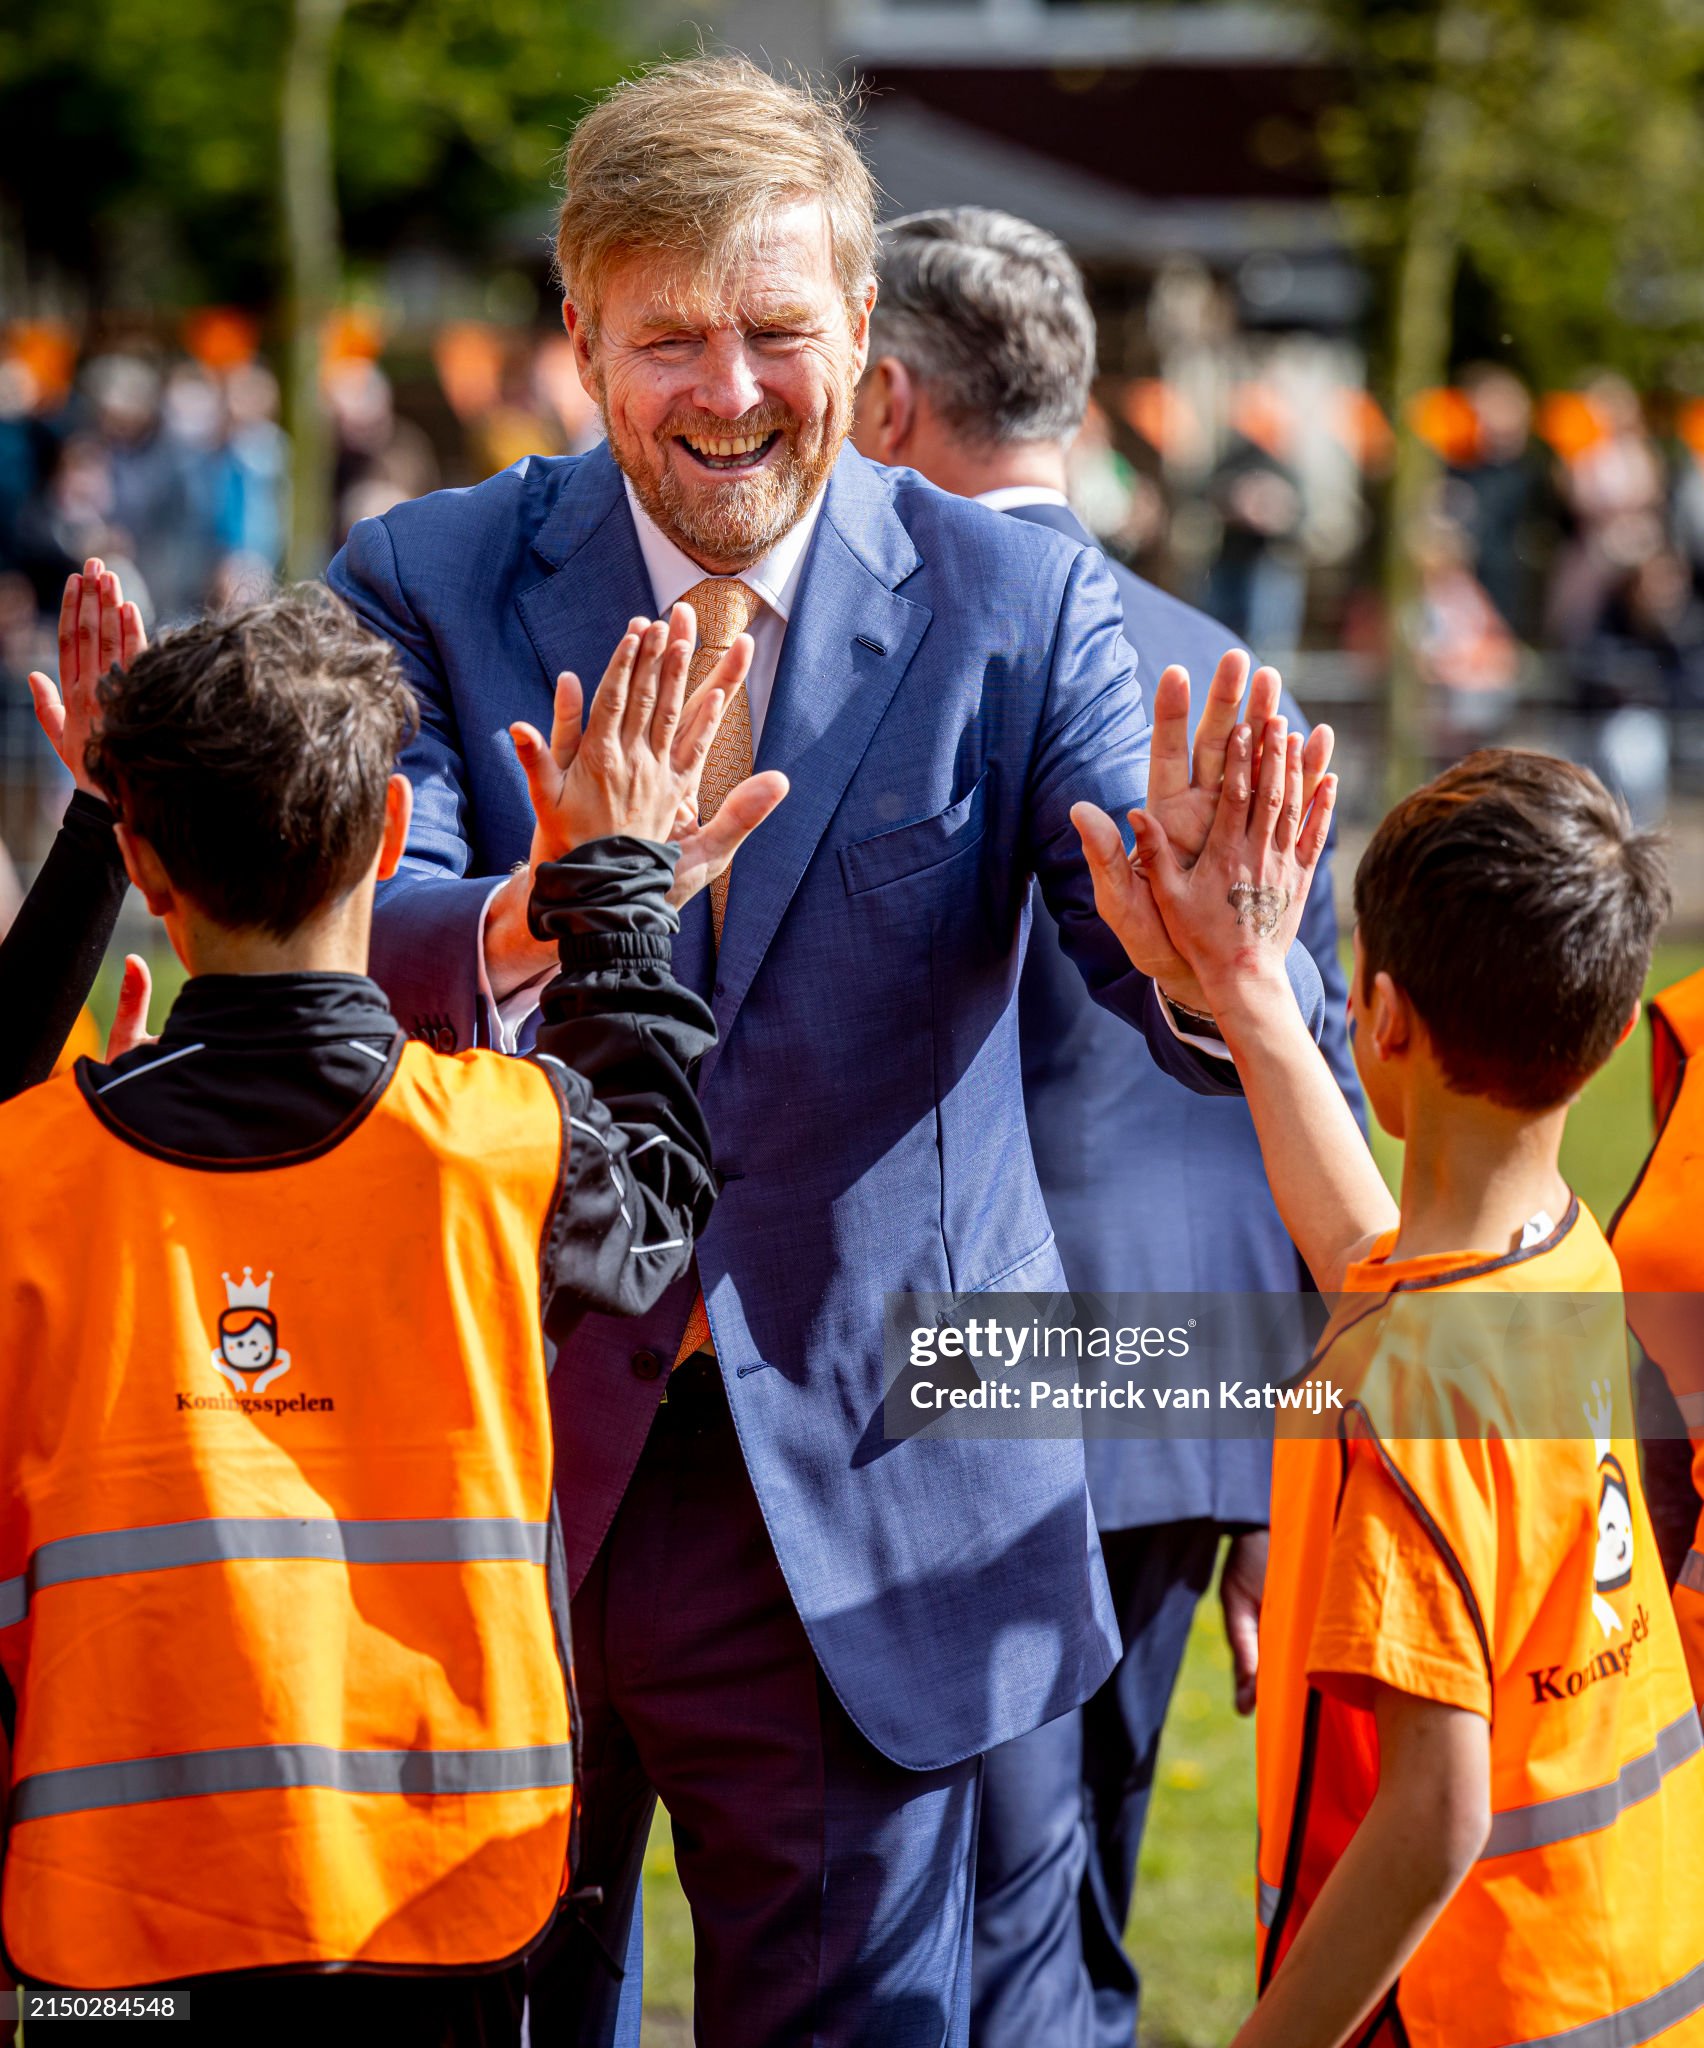 king-willem-alexander-queen-maxima-of-the-netherlands-visits-attend-the-kinsgame-in-hoofddorp.jpg?s=2048x2048&w=gi&k=20&c=uJrQxaoLPiEnB4vz8Xs1vJ2_0yc5m21488Y1C9vs8BU=